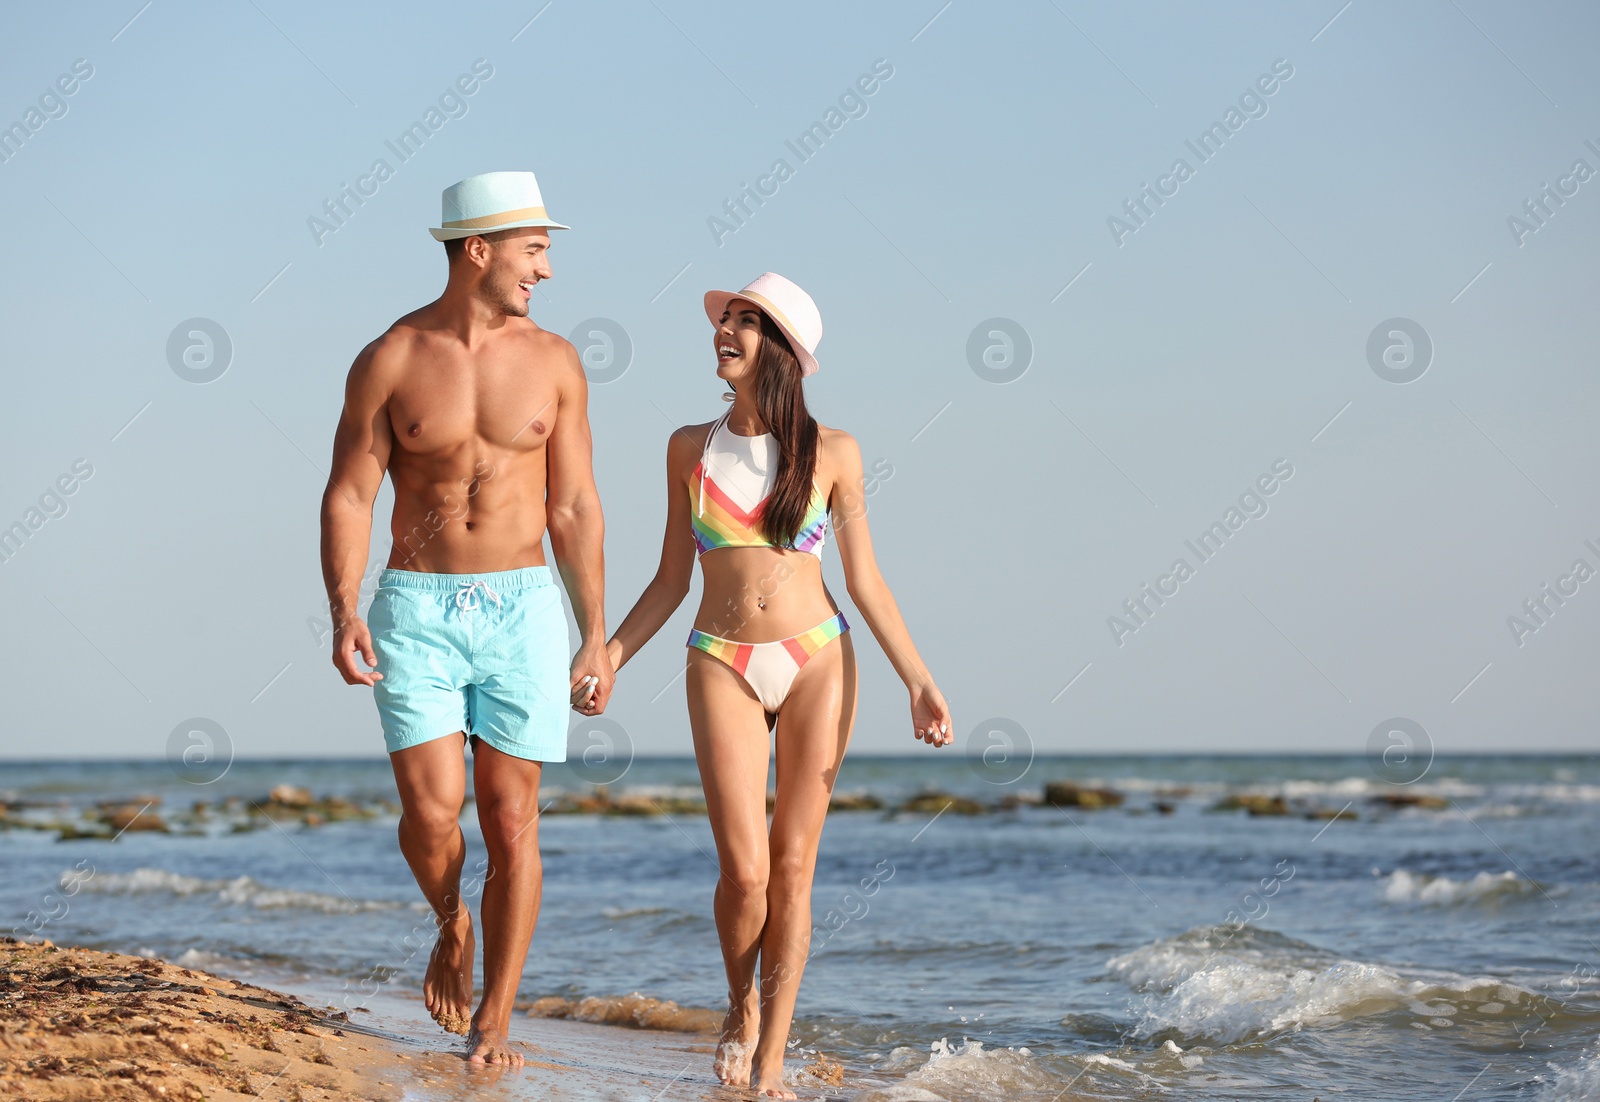 Photo of Happy young couple walking together on beach